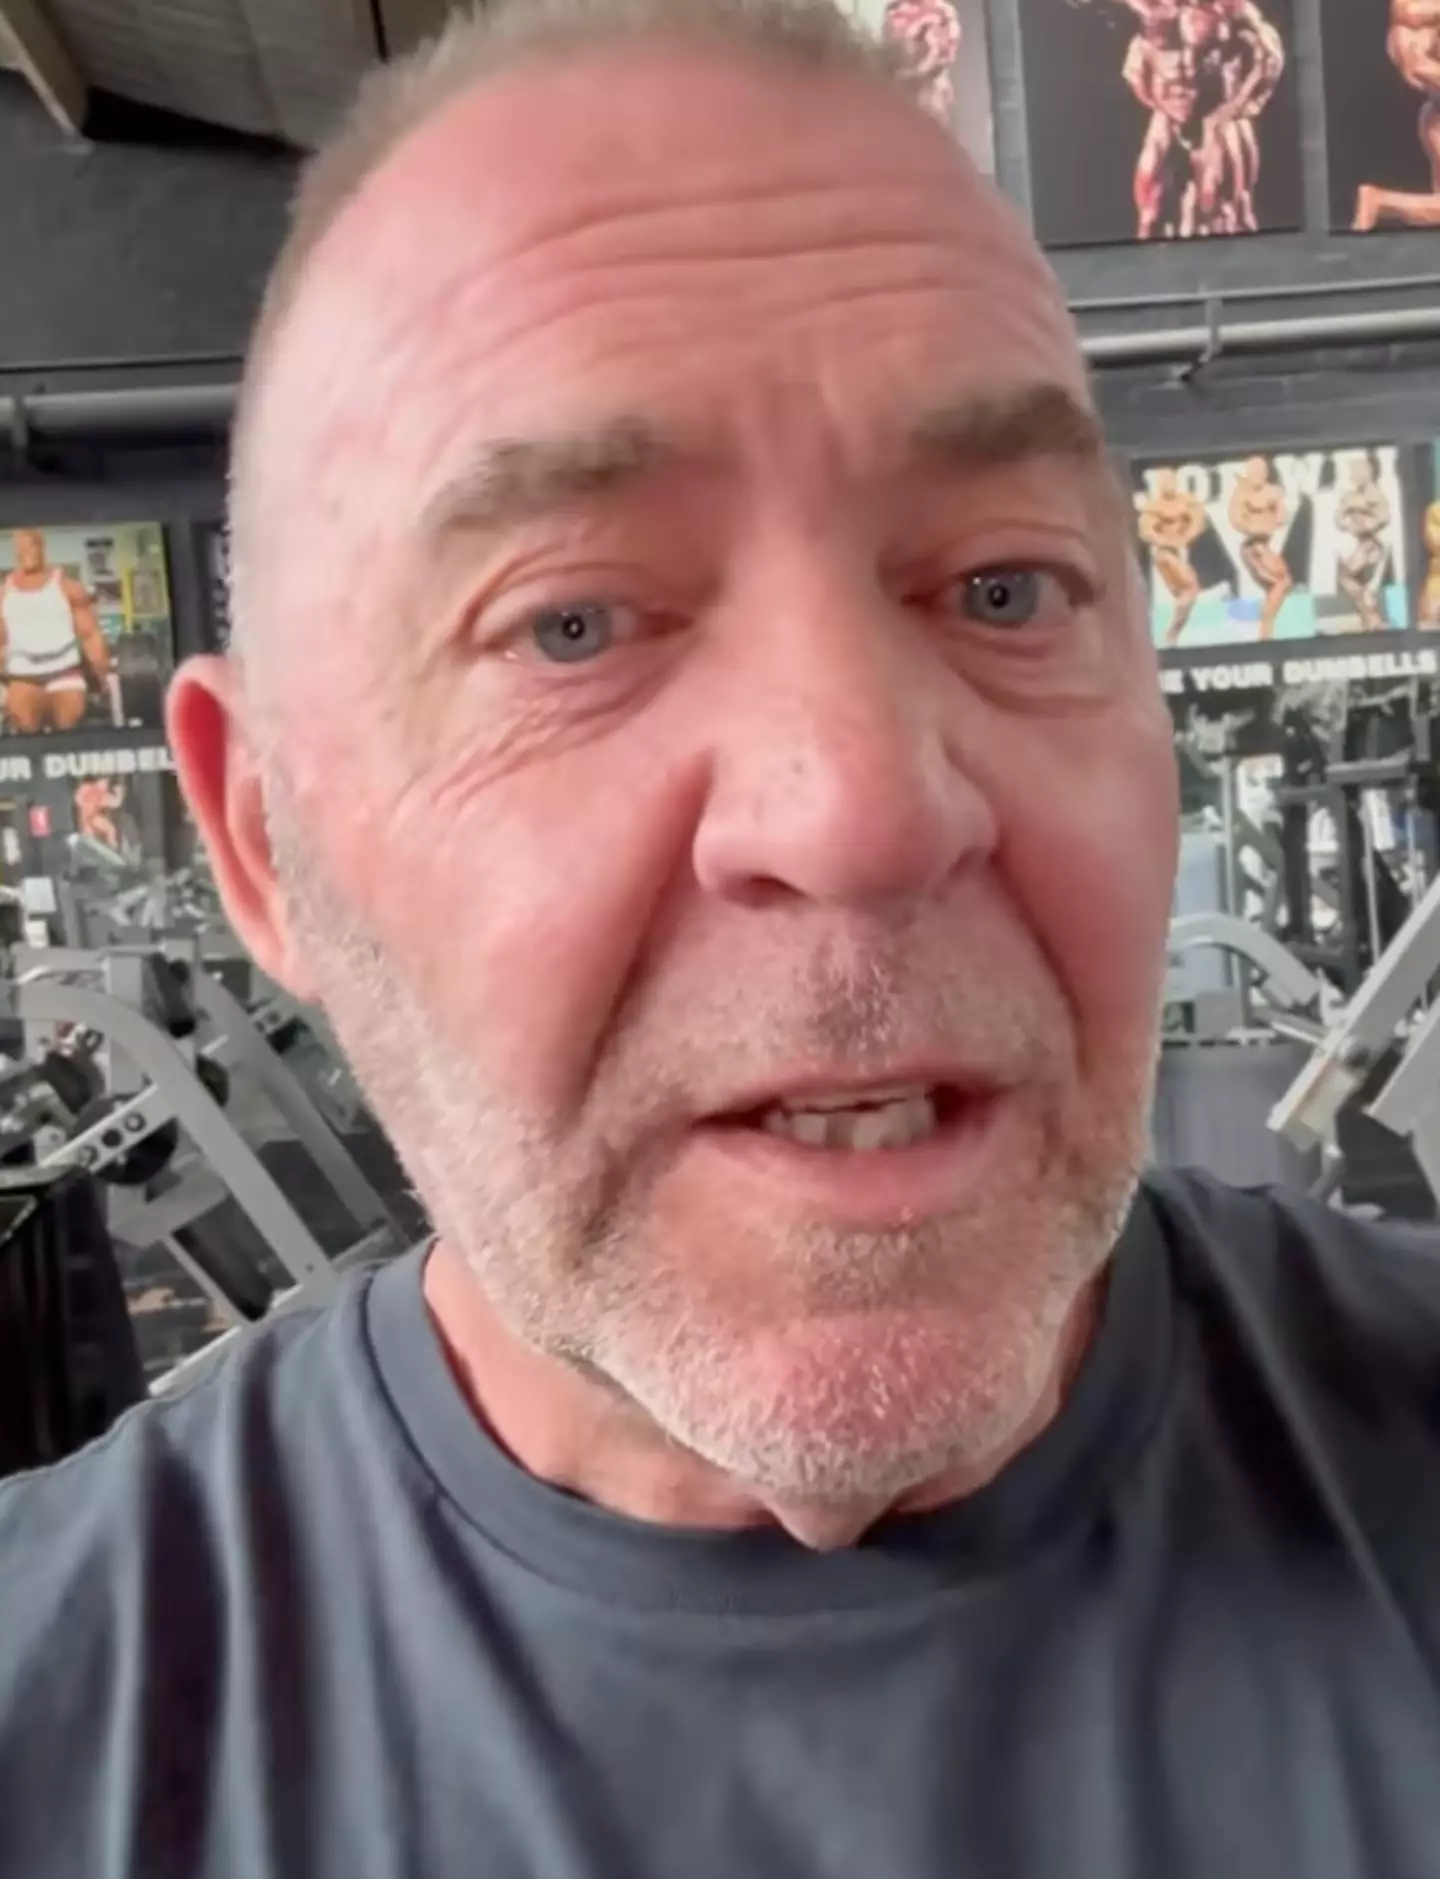 Gym owner Tony explained the rule.